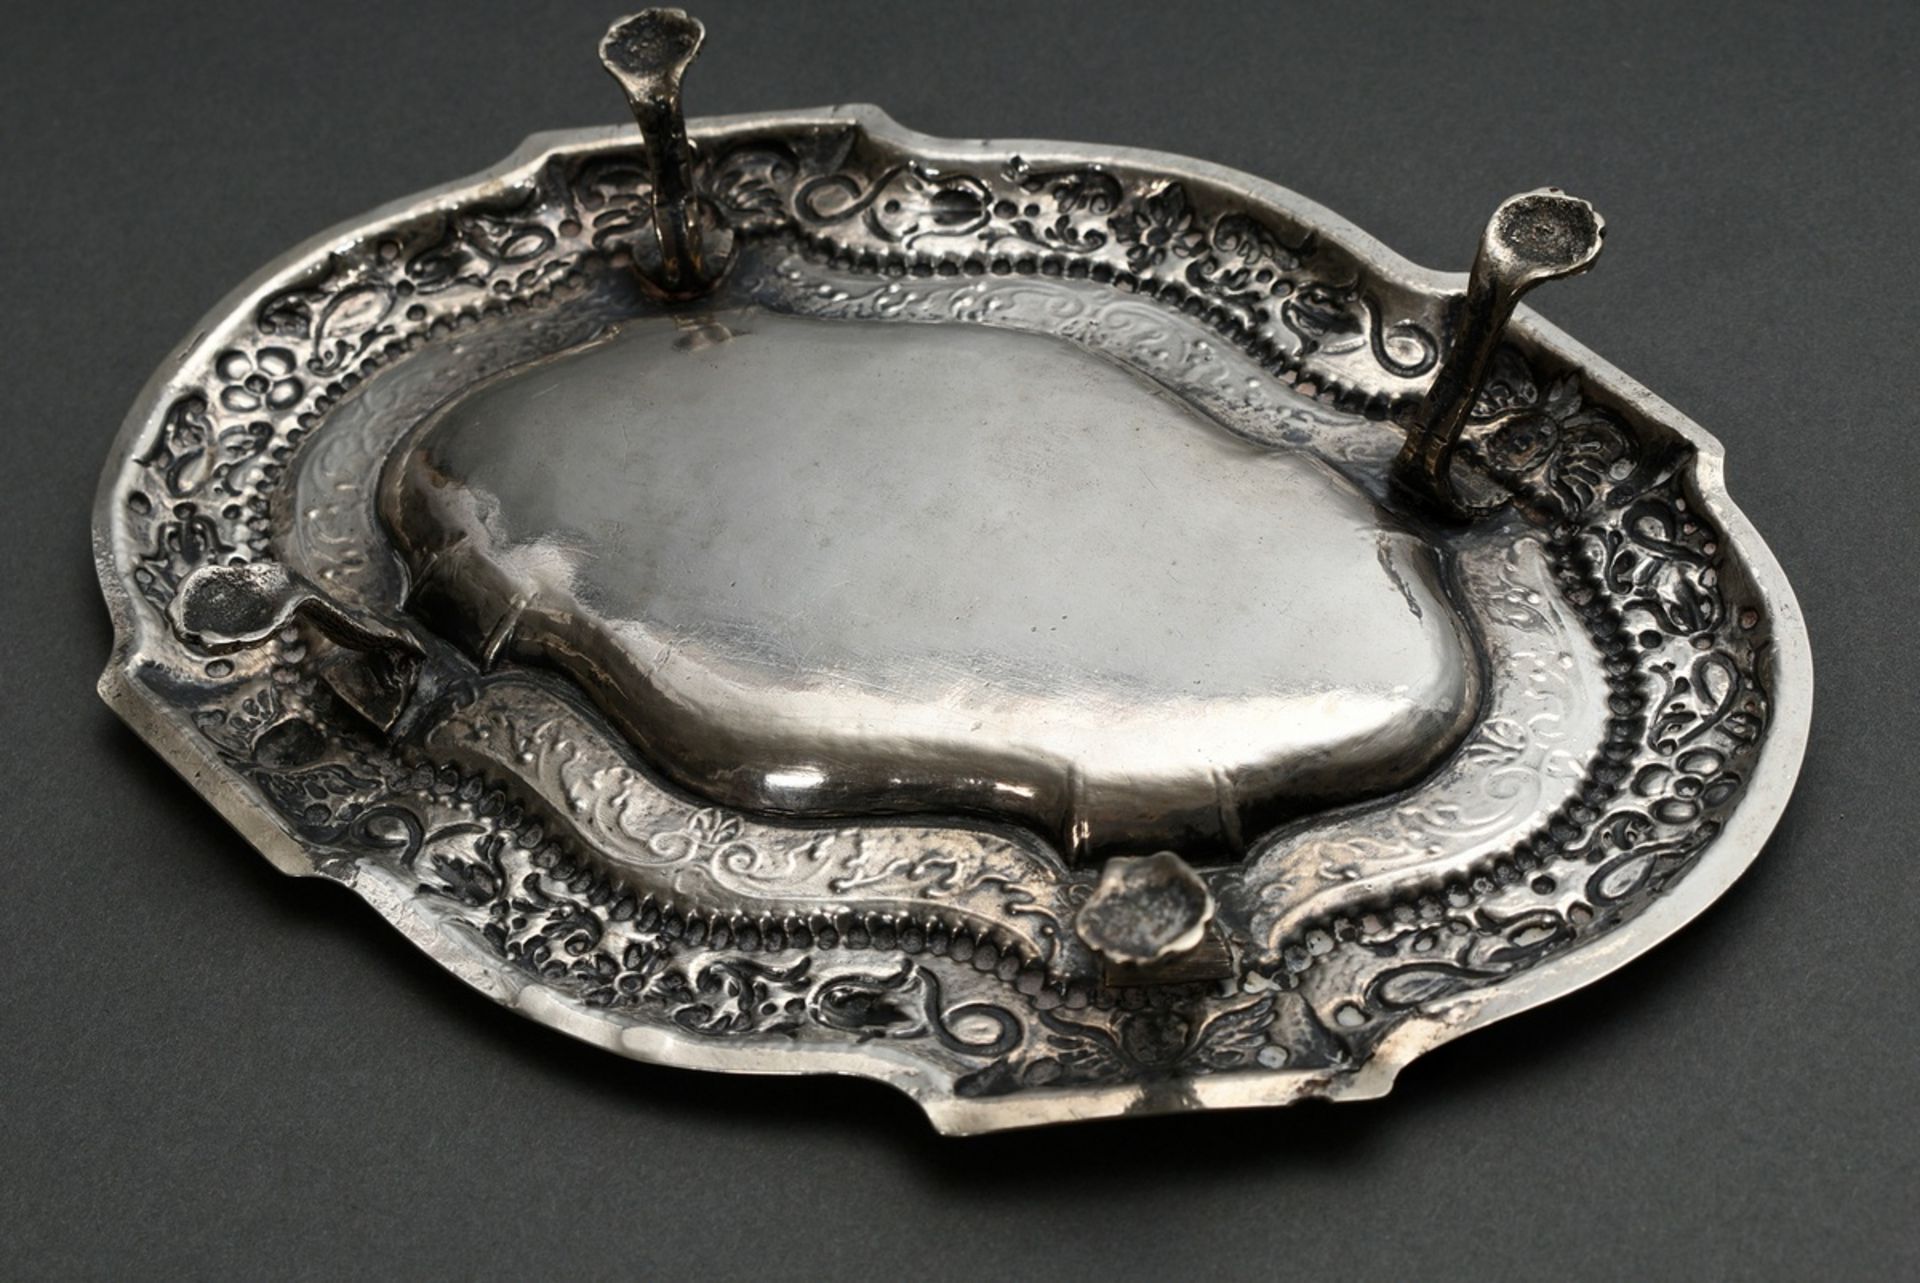 Oval Régence presentoir with richly decorated rim on paw feet, c. 1720, MM: ‘PW’, silver, 159g, 13x - Image 2 of 3